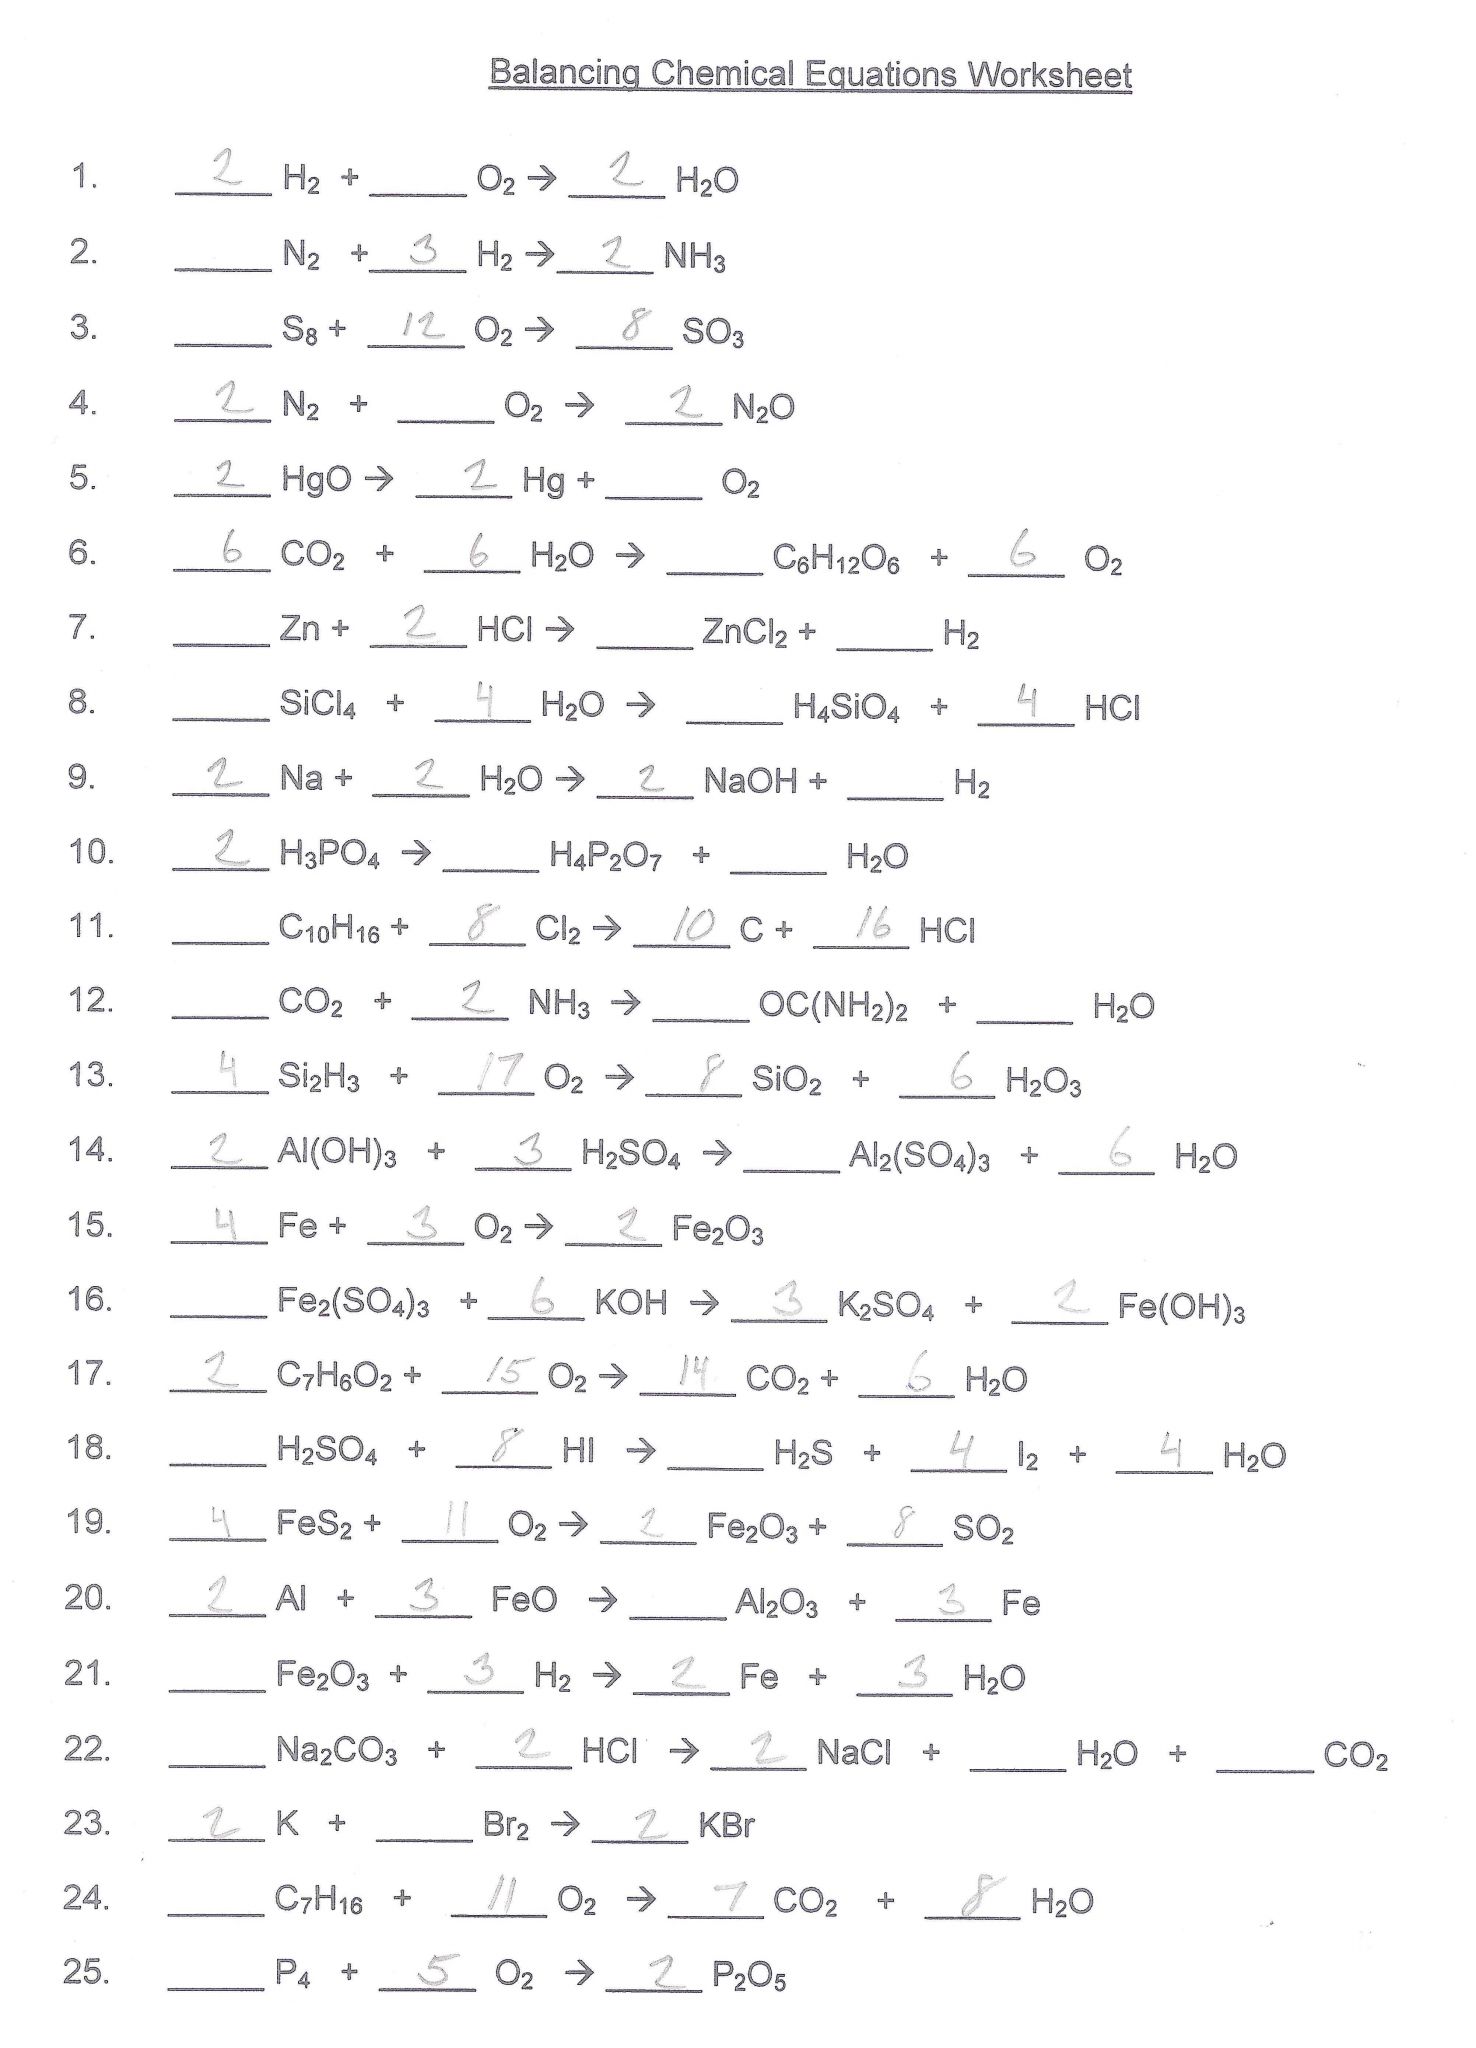 Chemical Reaction Worksheet Answers or Balancing Chemical Equations Worksheet Answer Key